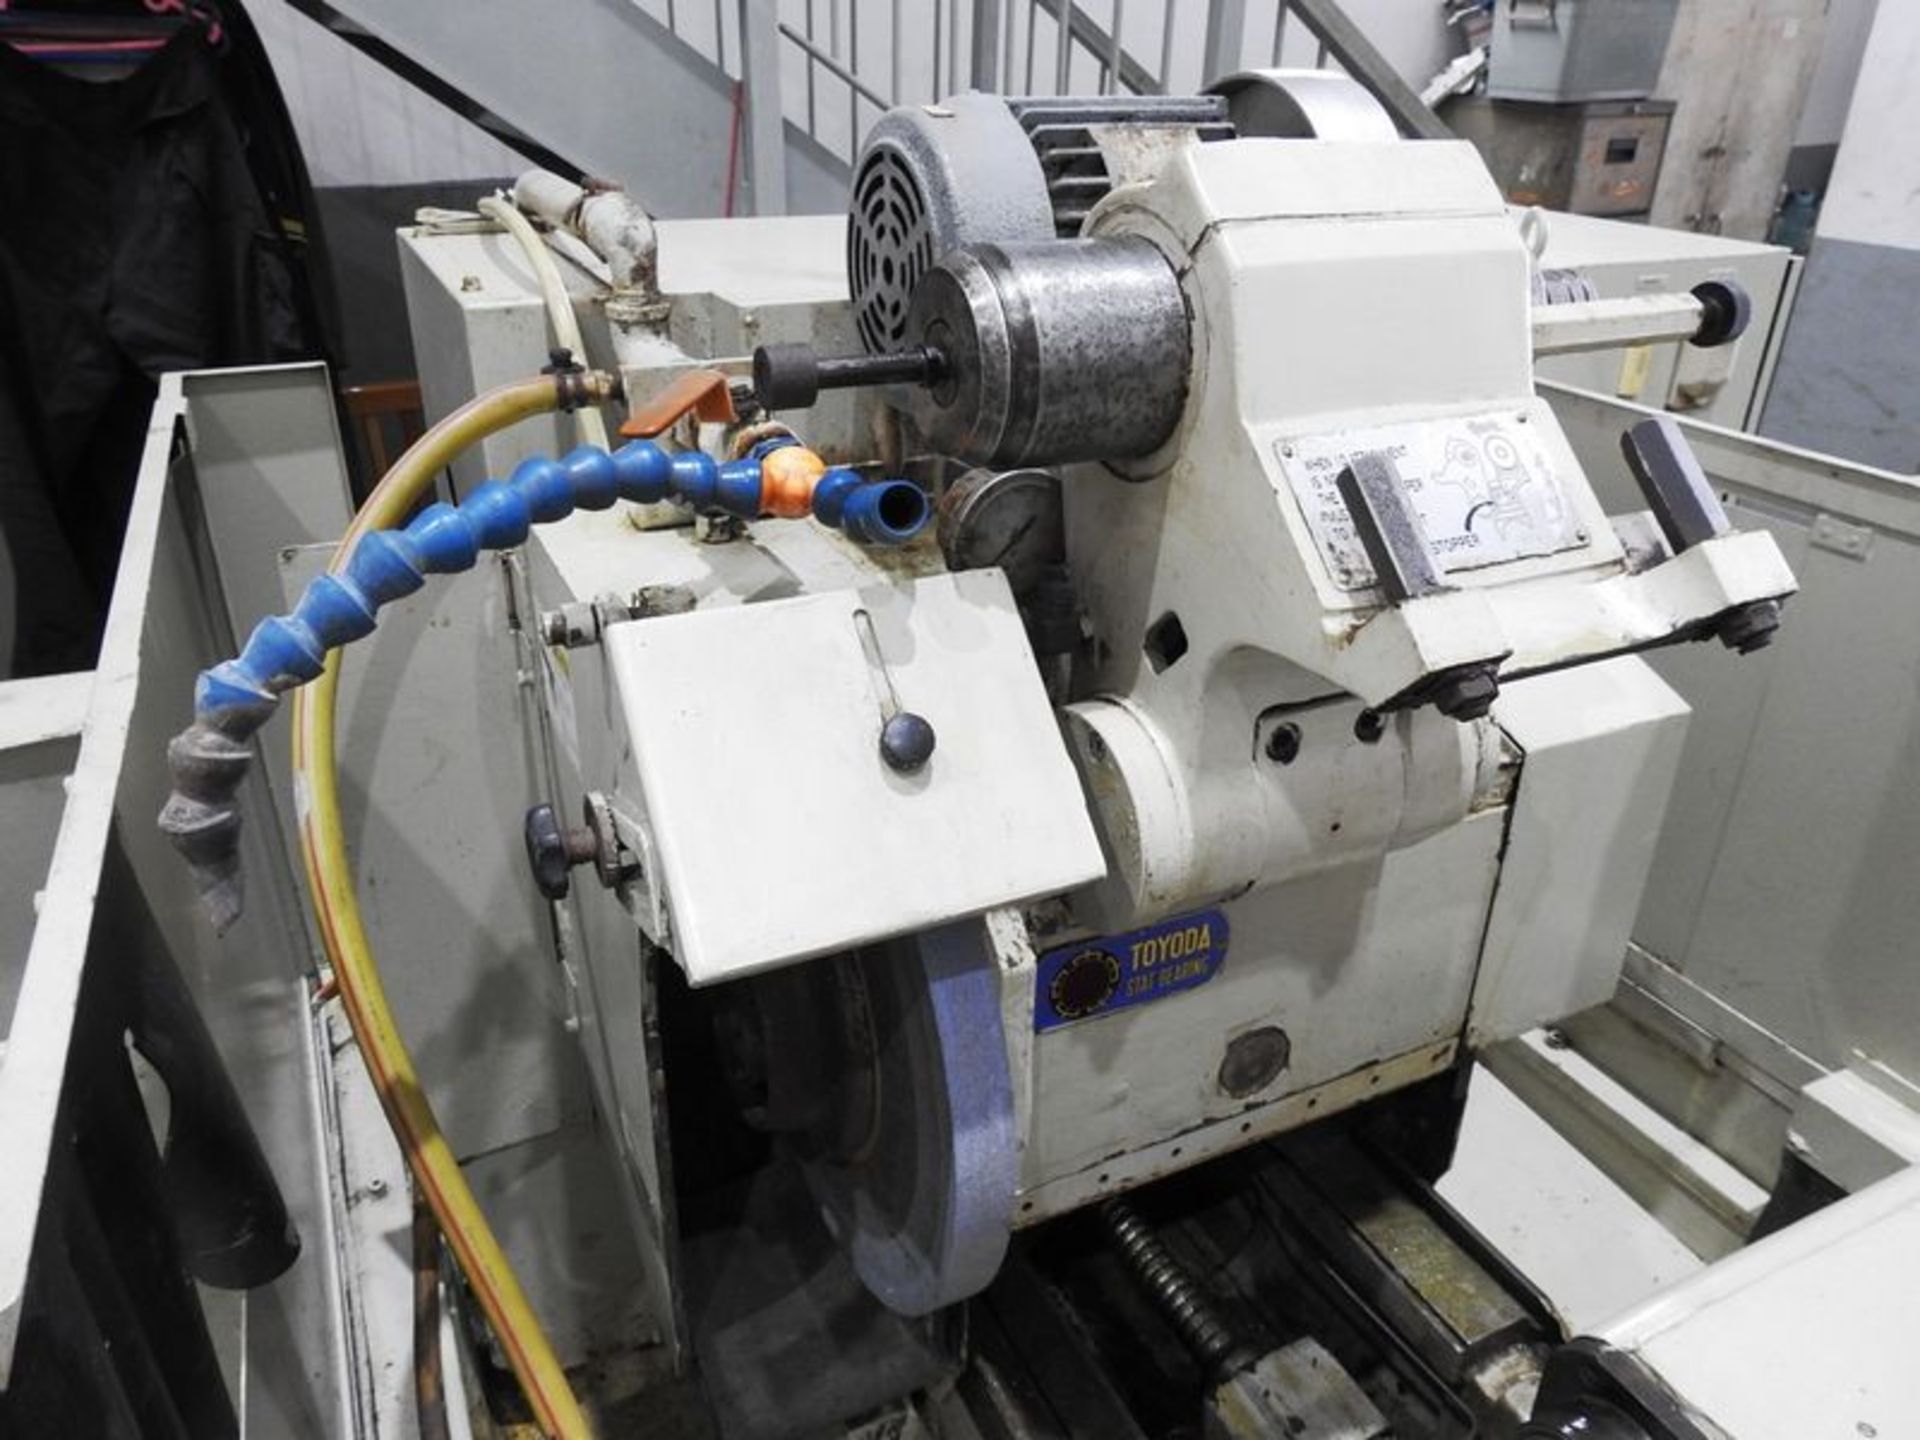 12.6"X19.7" TOYODA GE4P-50 CNC PLAIN CYLINDRICAL GRINDER W/INTERNAL GRINDING ATTACHMENT - Image 3 of 8